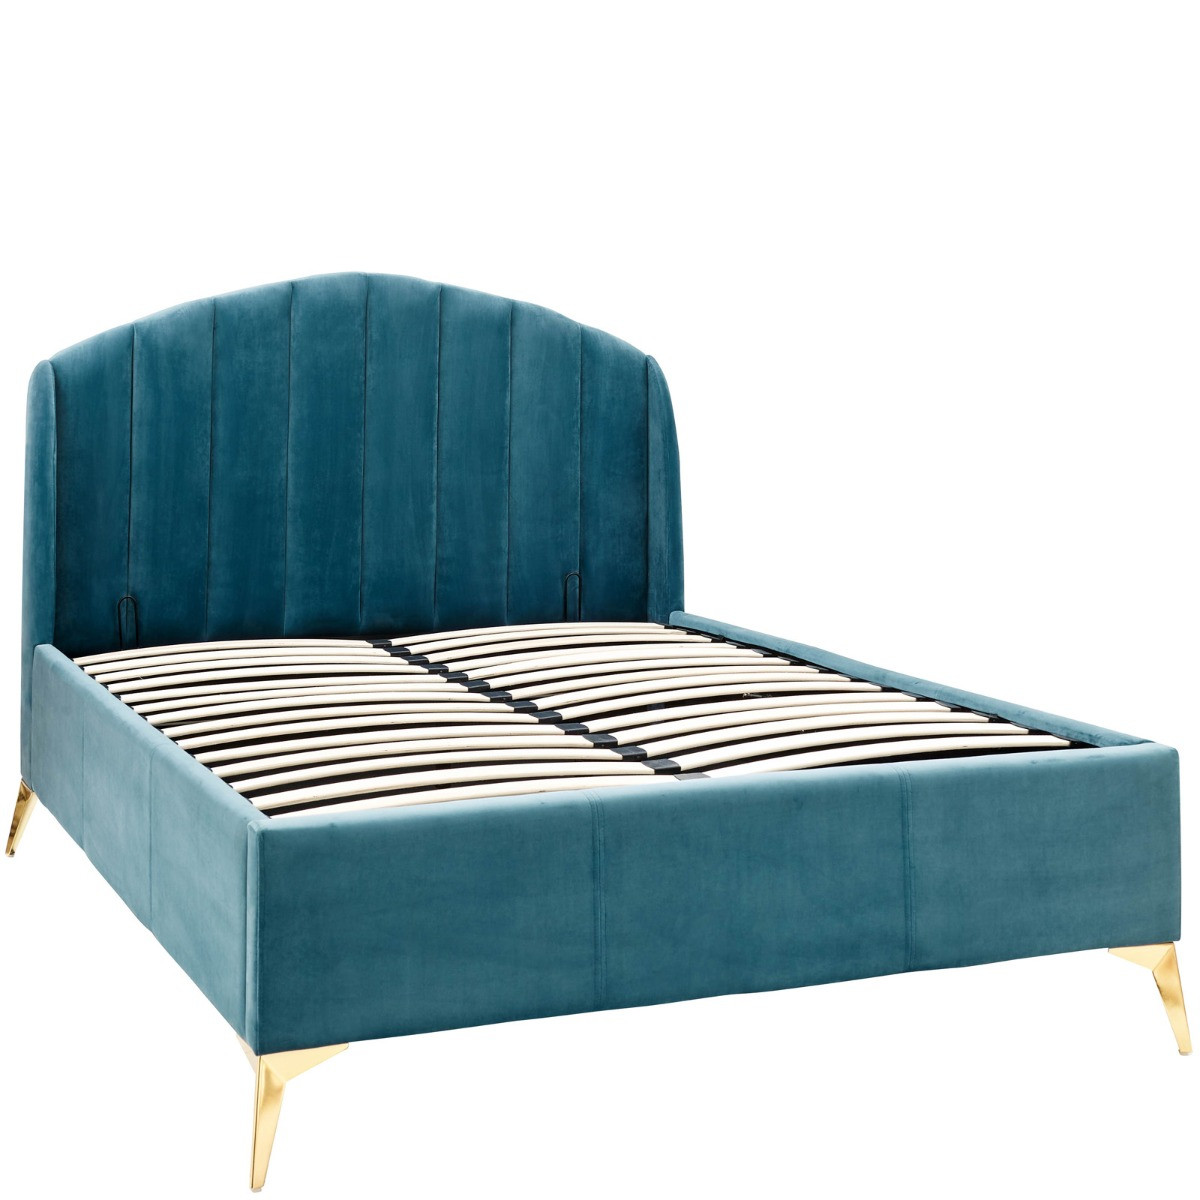 Pettine End Lift Ottoman Storage Bed - Teal>